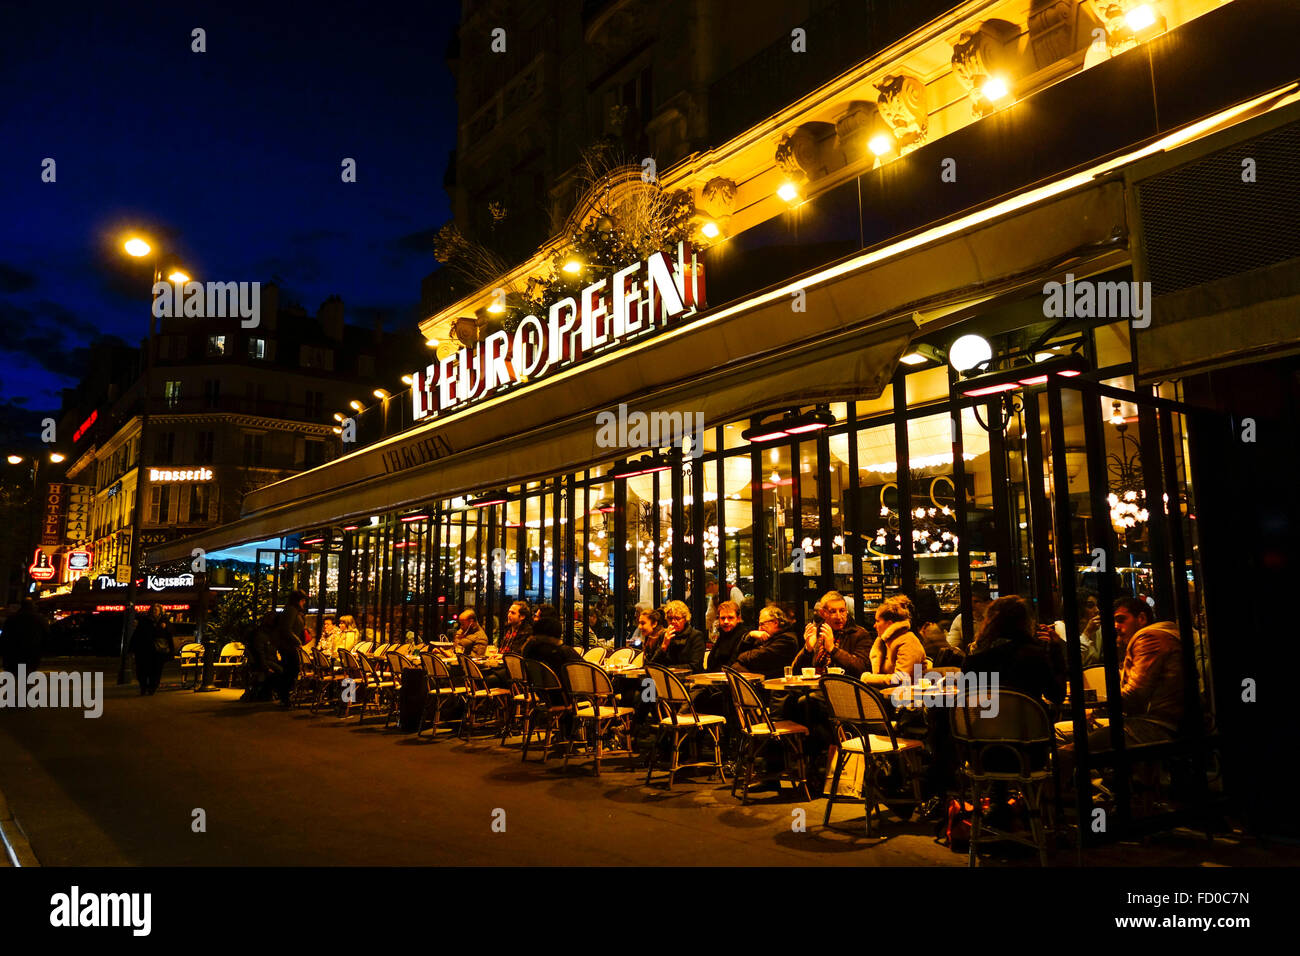 Brasserie L'Europeen restaurant at night with outside terrace, Paris, France. Stock Photo